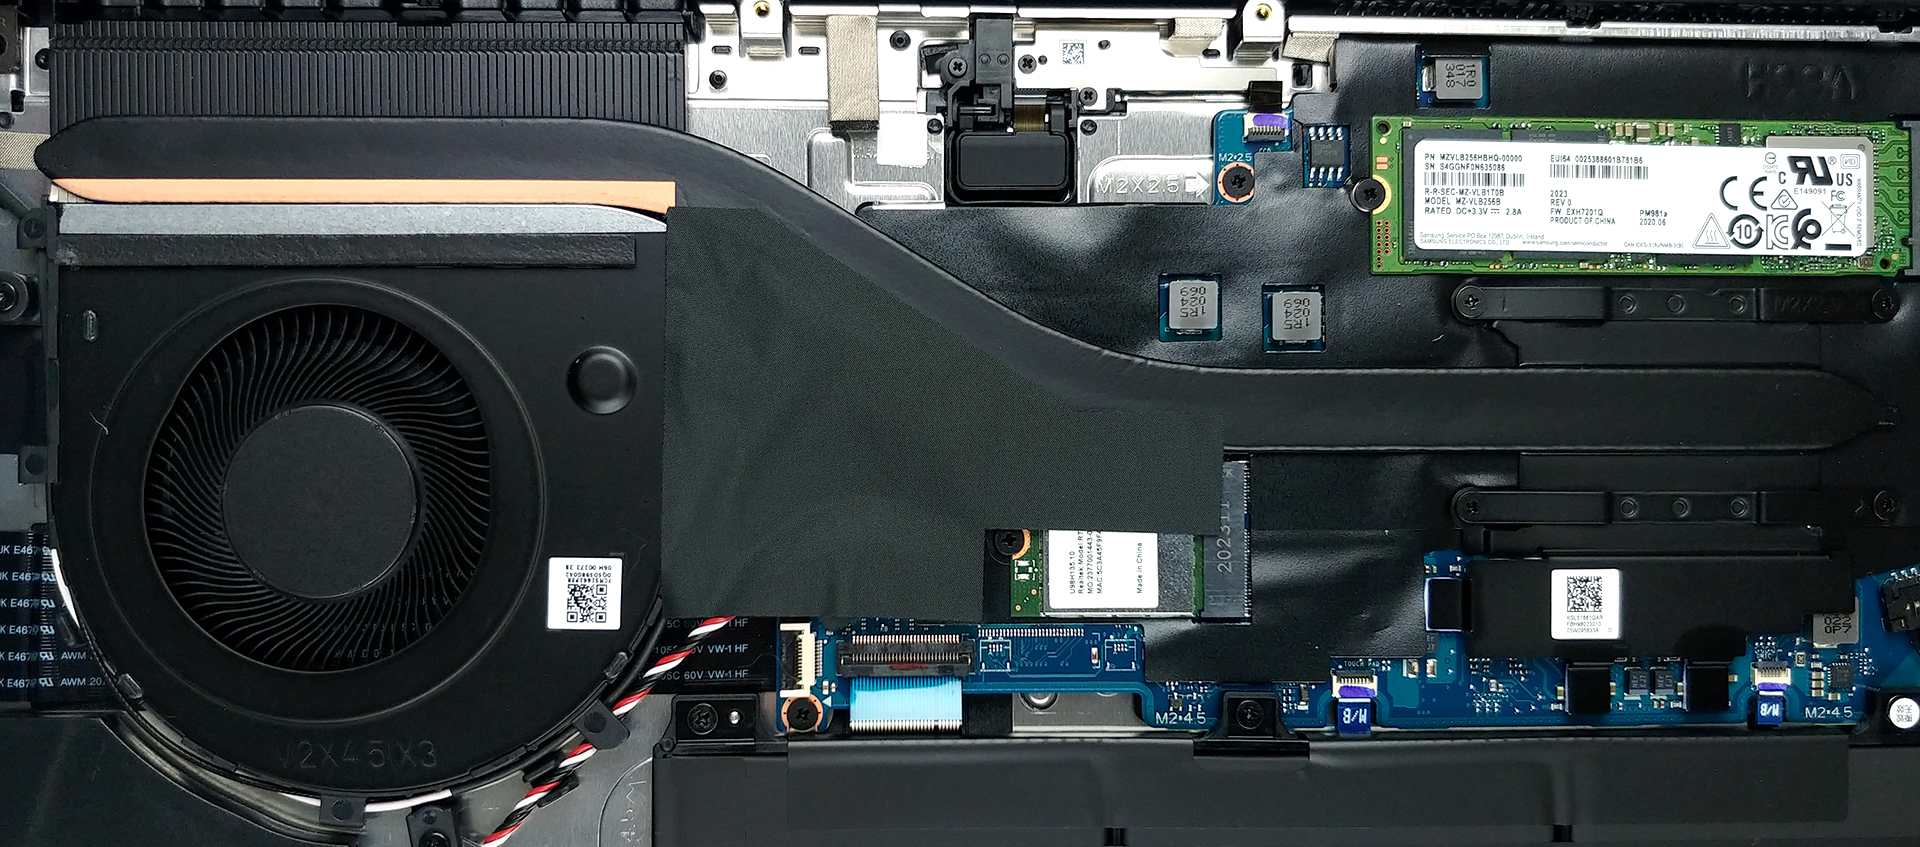 Inside Huawei MateBook D 14 (2020) - disassembly and upgrade options